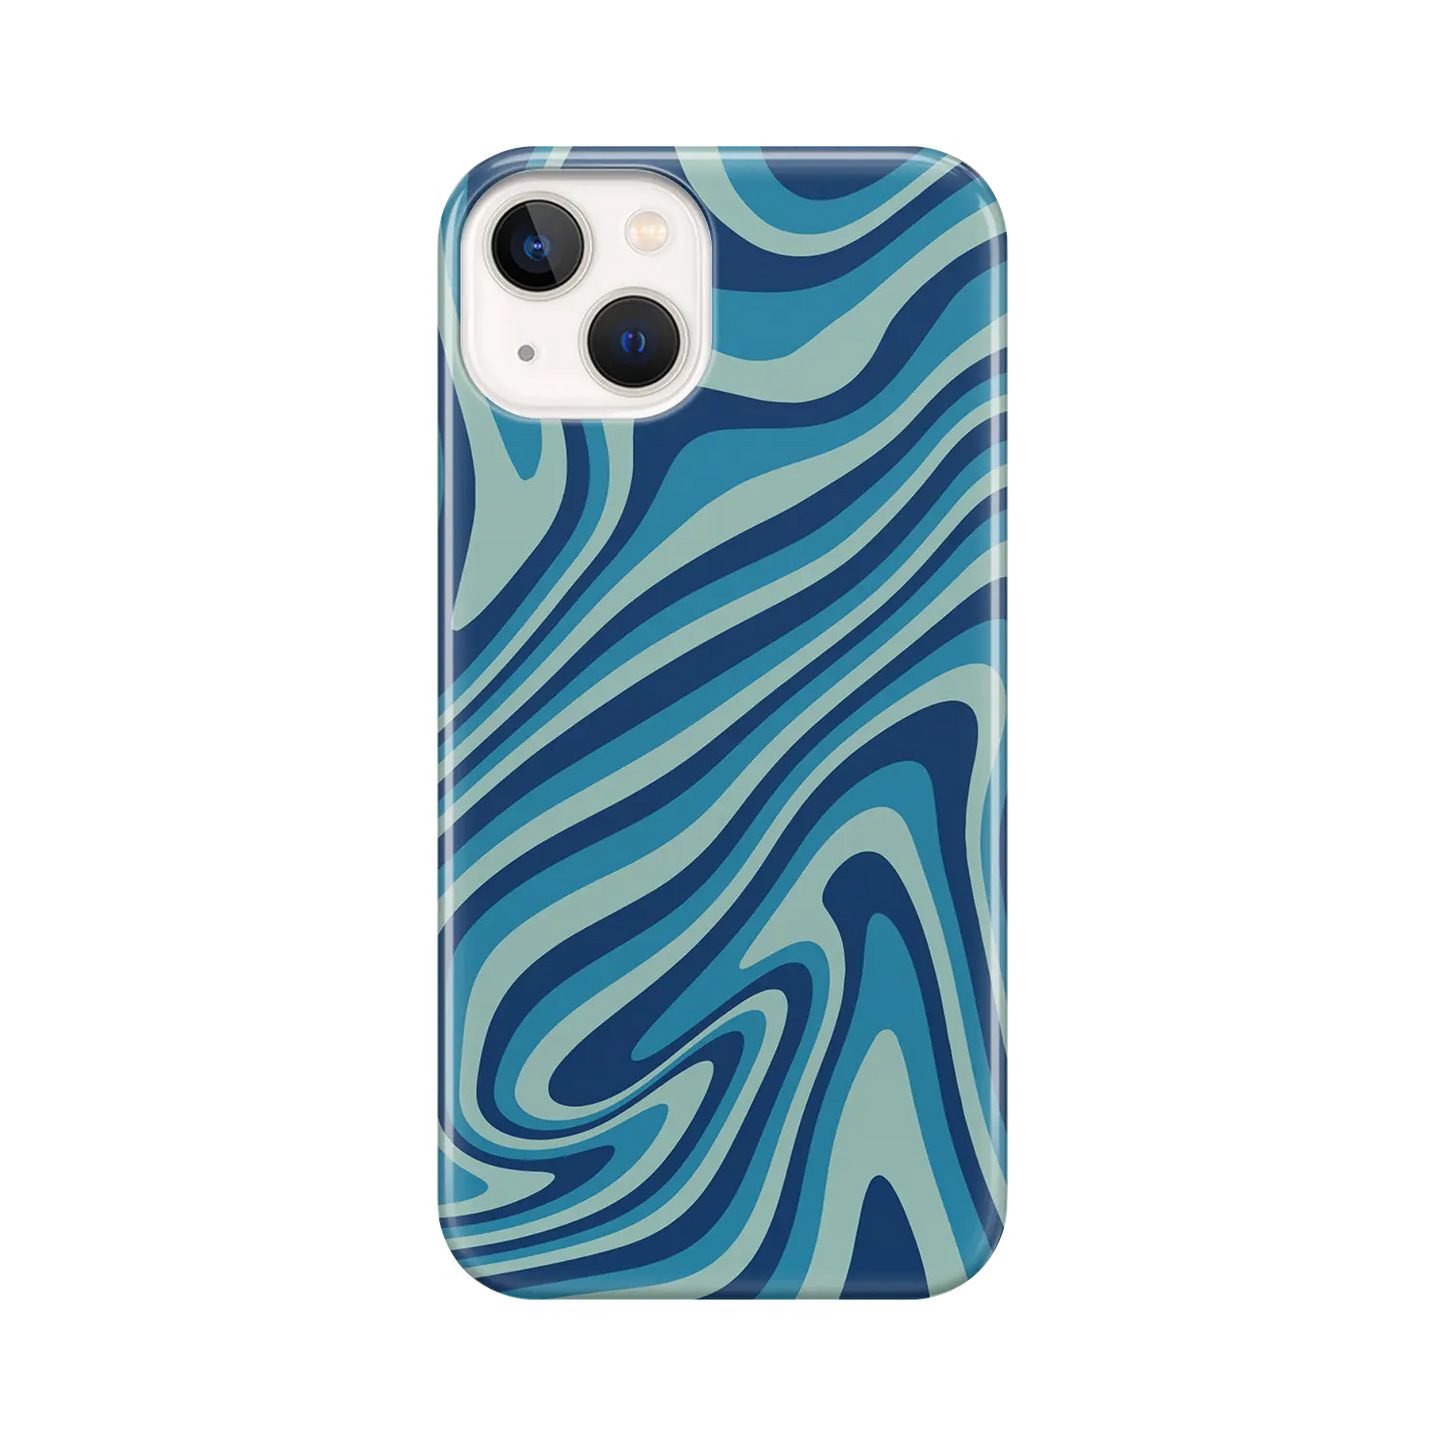 Groovy - Personalised iPhone Case